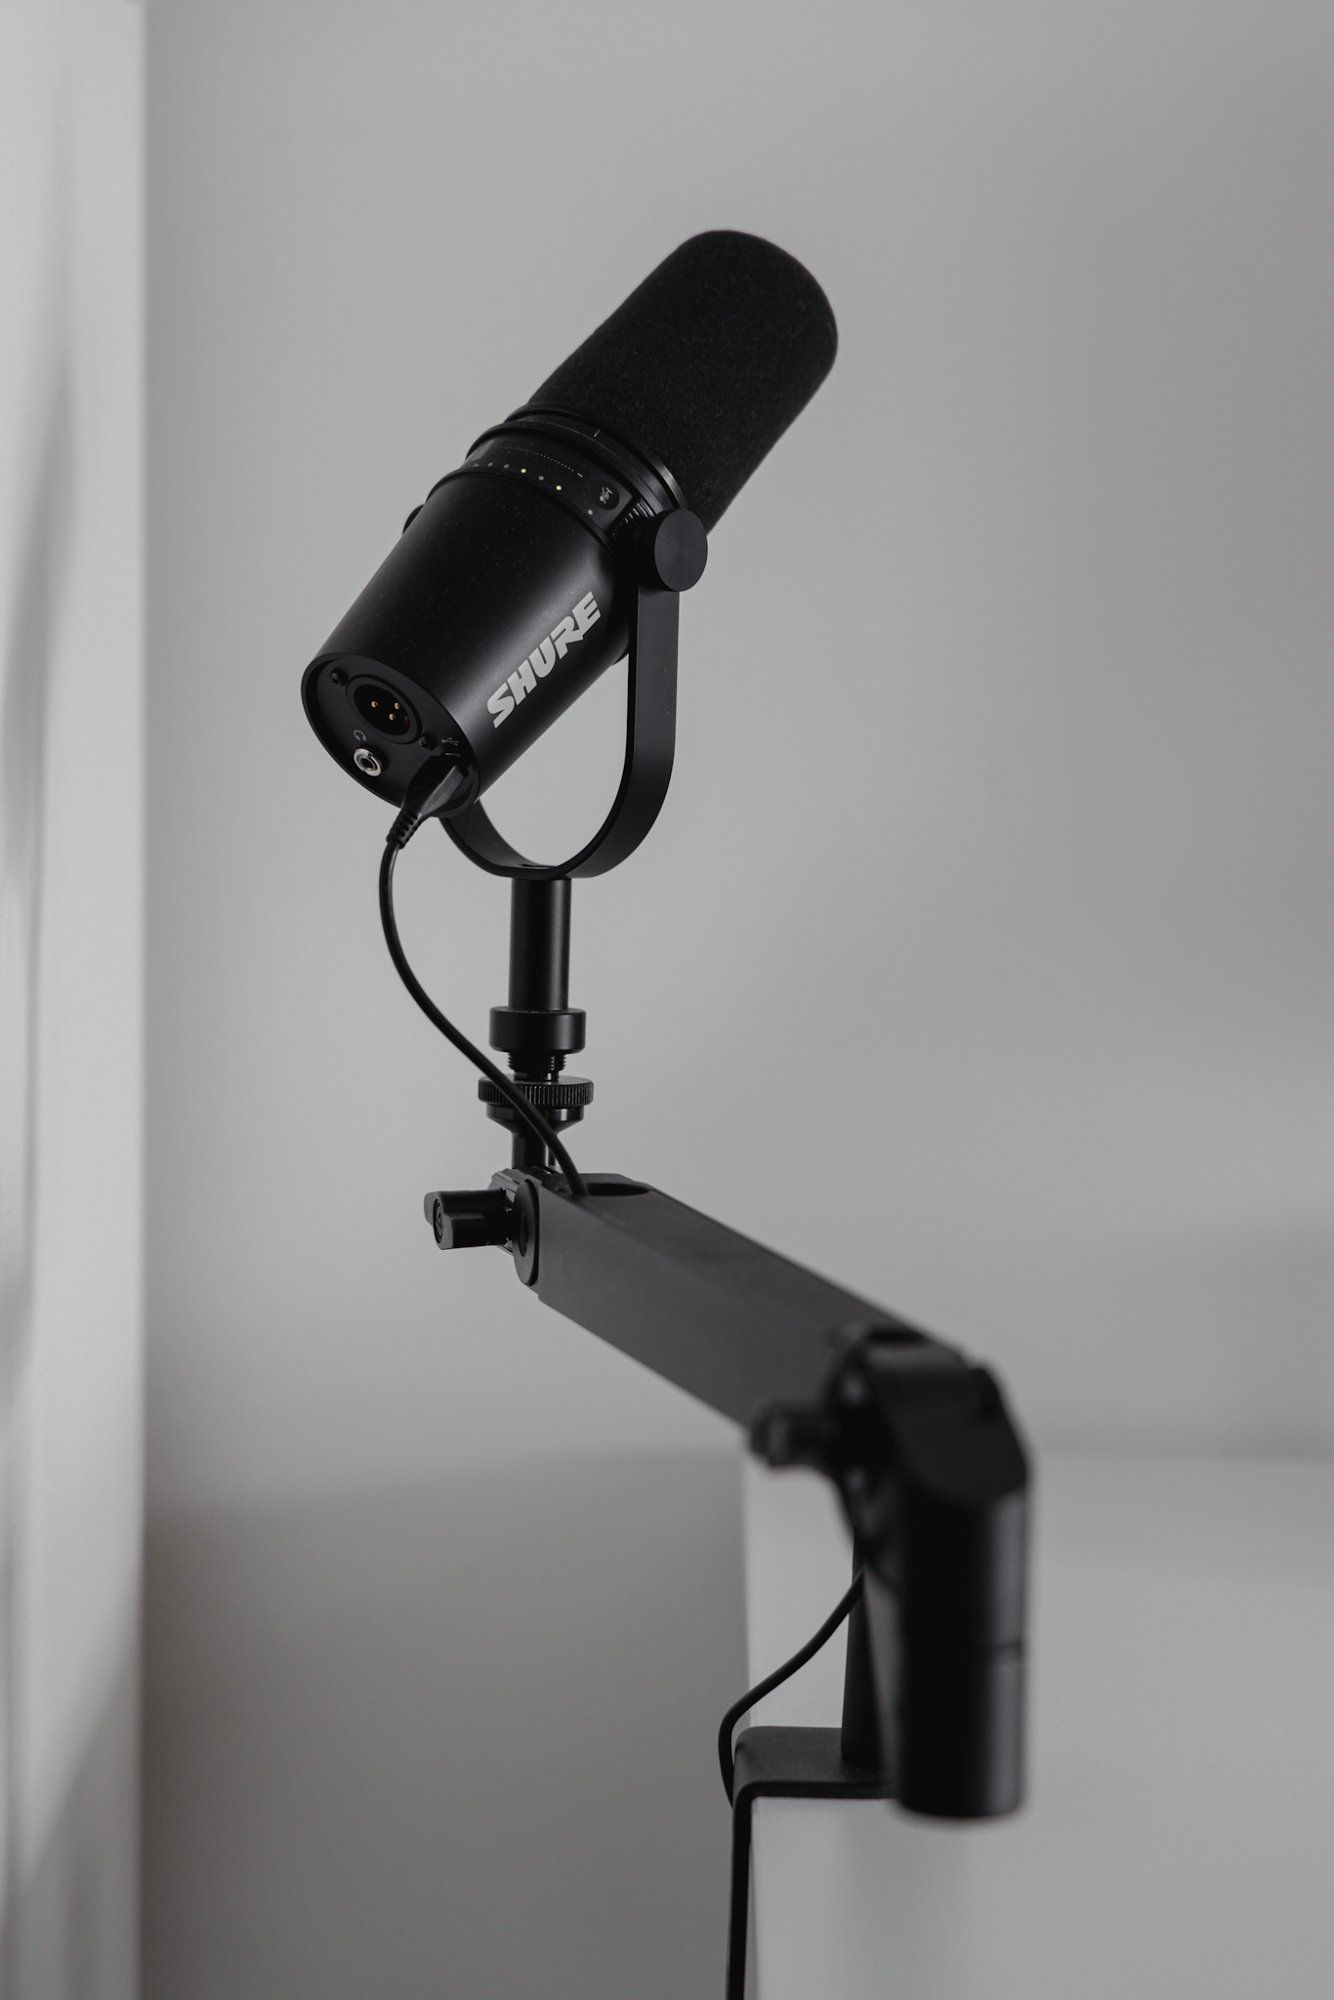 A Shure MV7 microphone on a stand